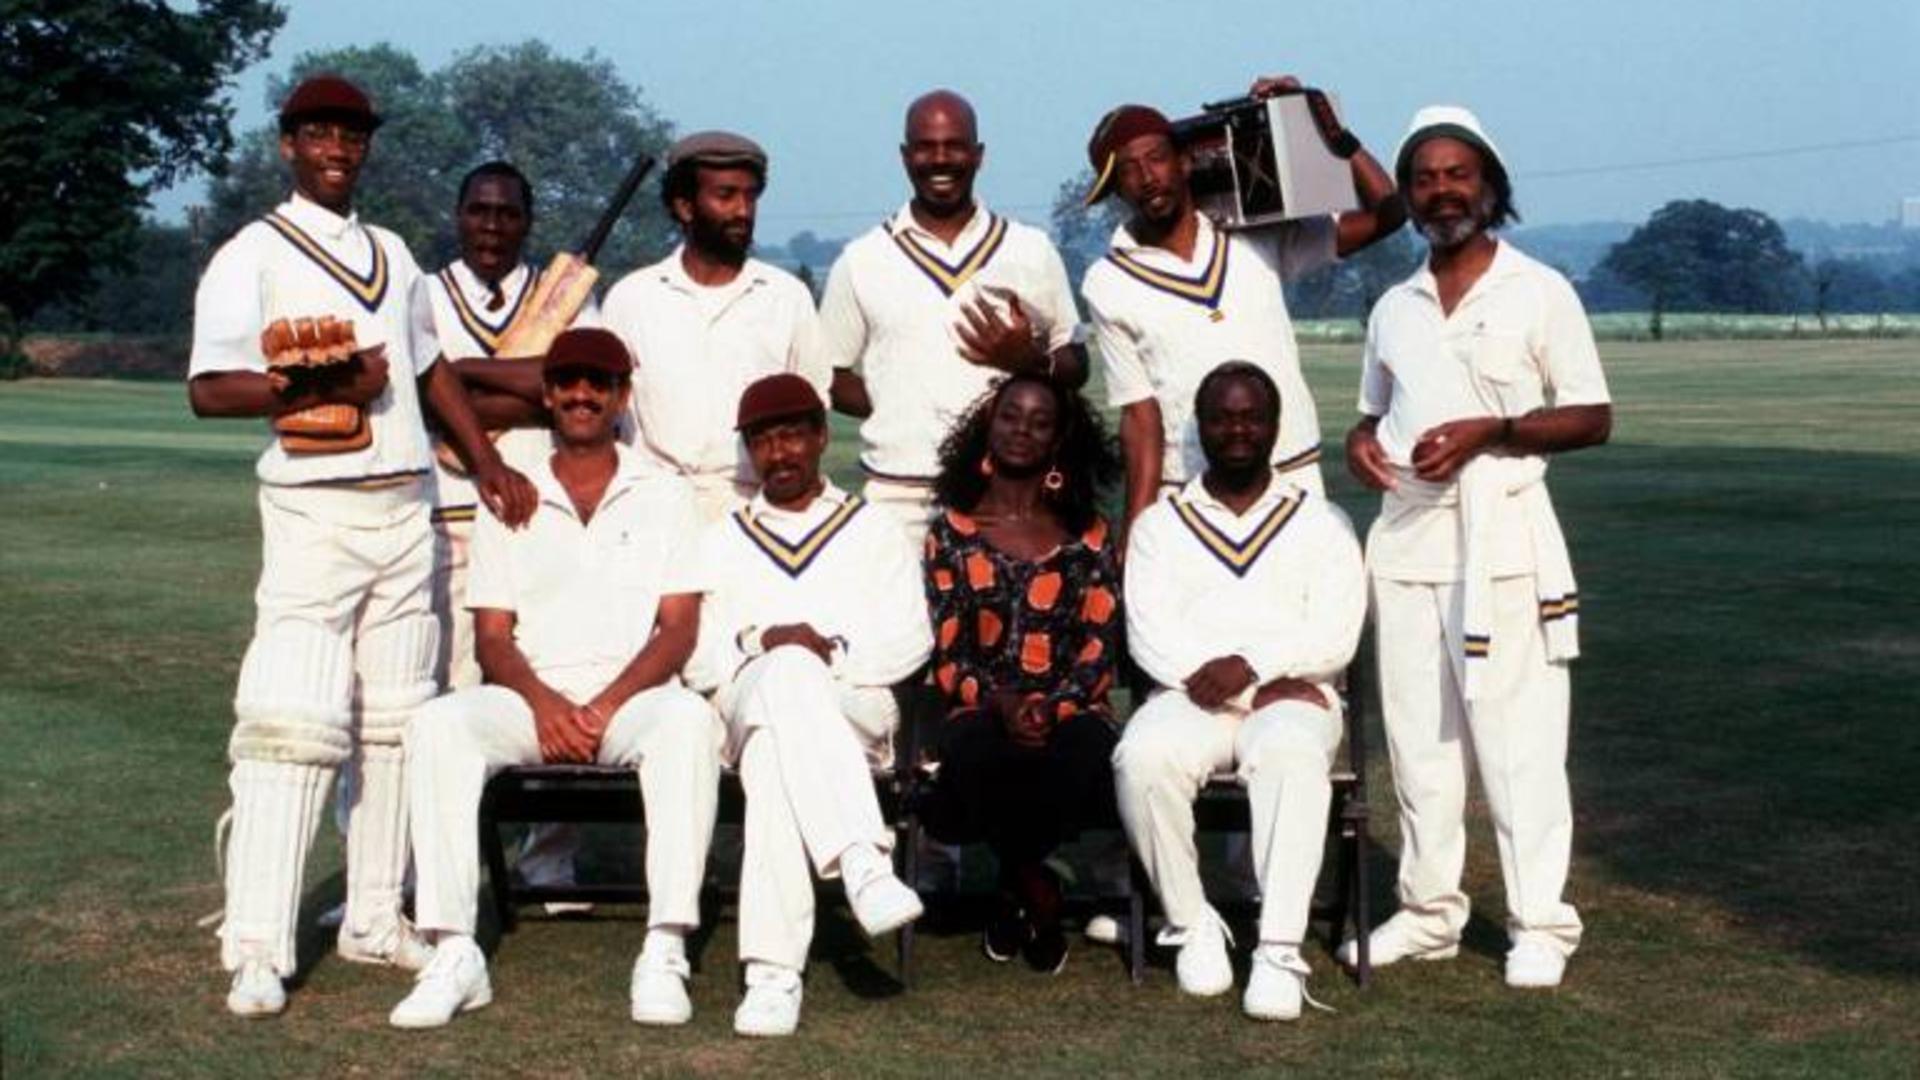 Still from Playing Away. Ten people in cricket attire and equipment pose for a group portrait in a cricket field.